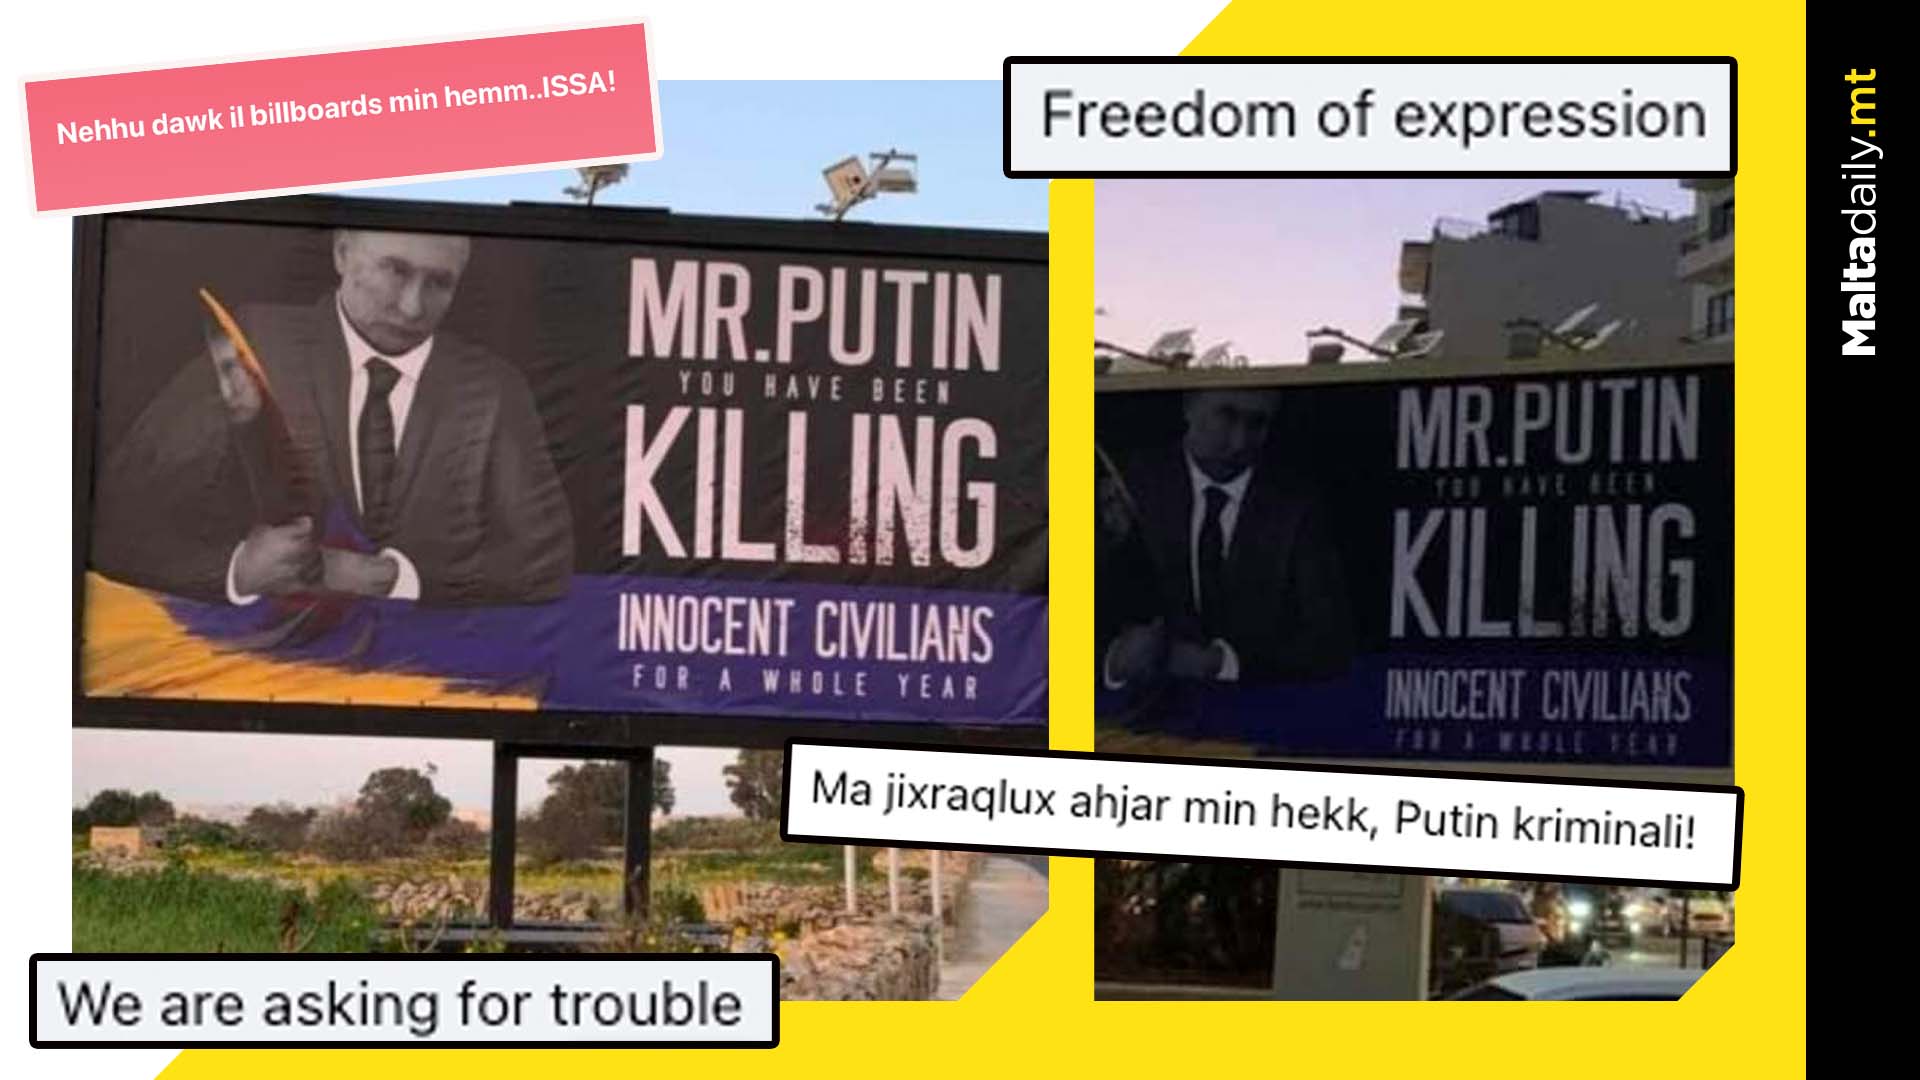 Mixed reactions to billboards in Malta condemning Putin